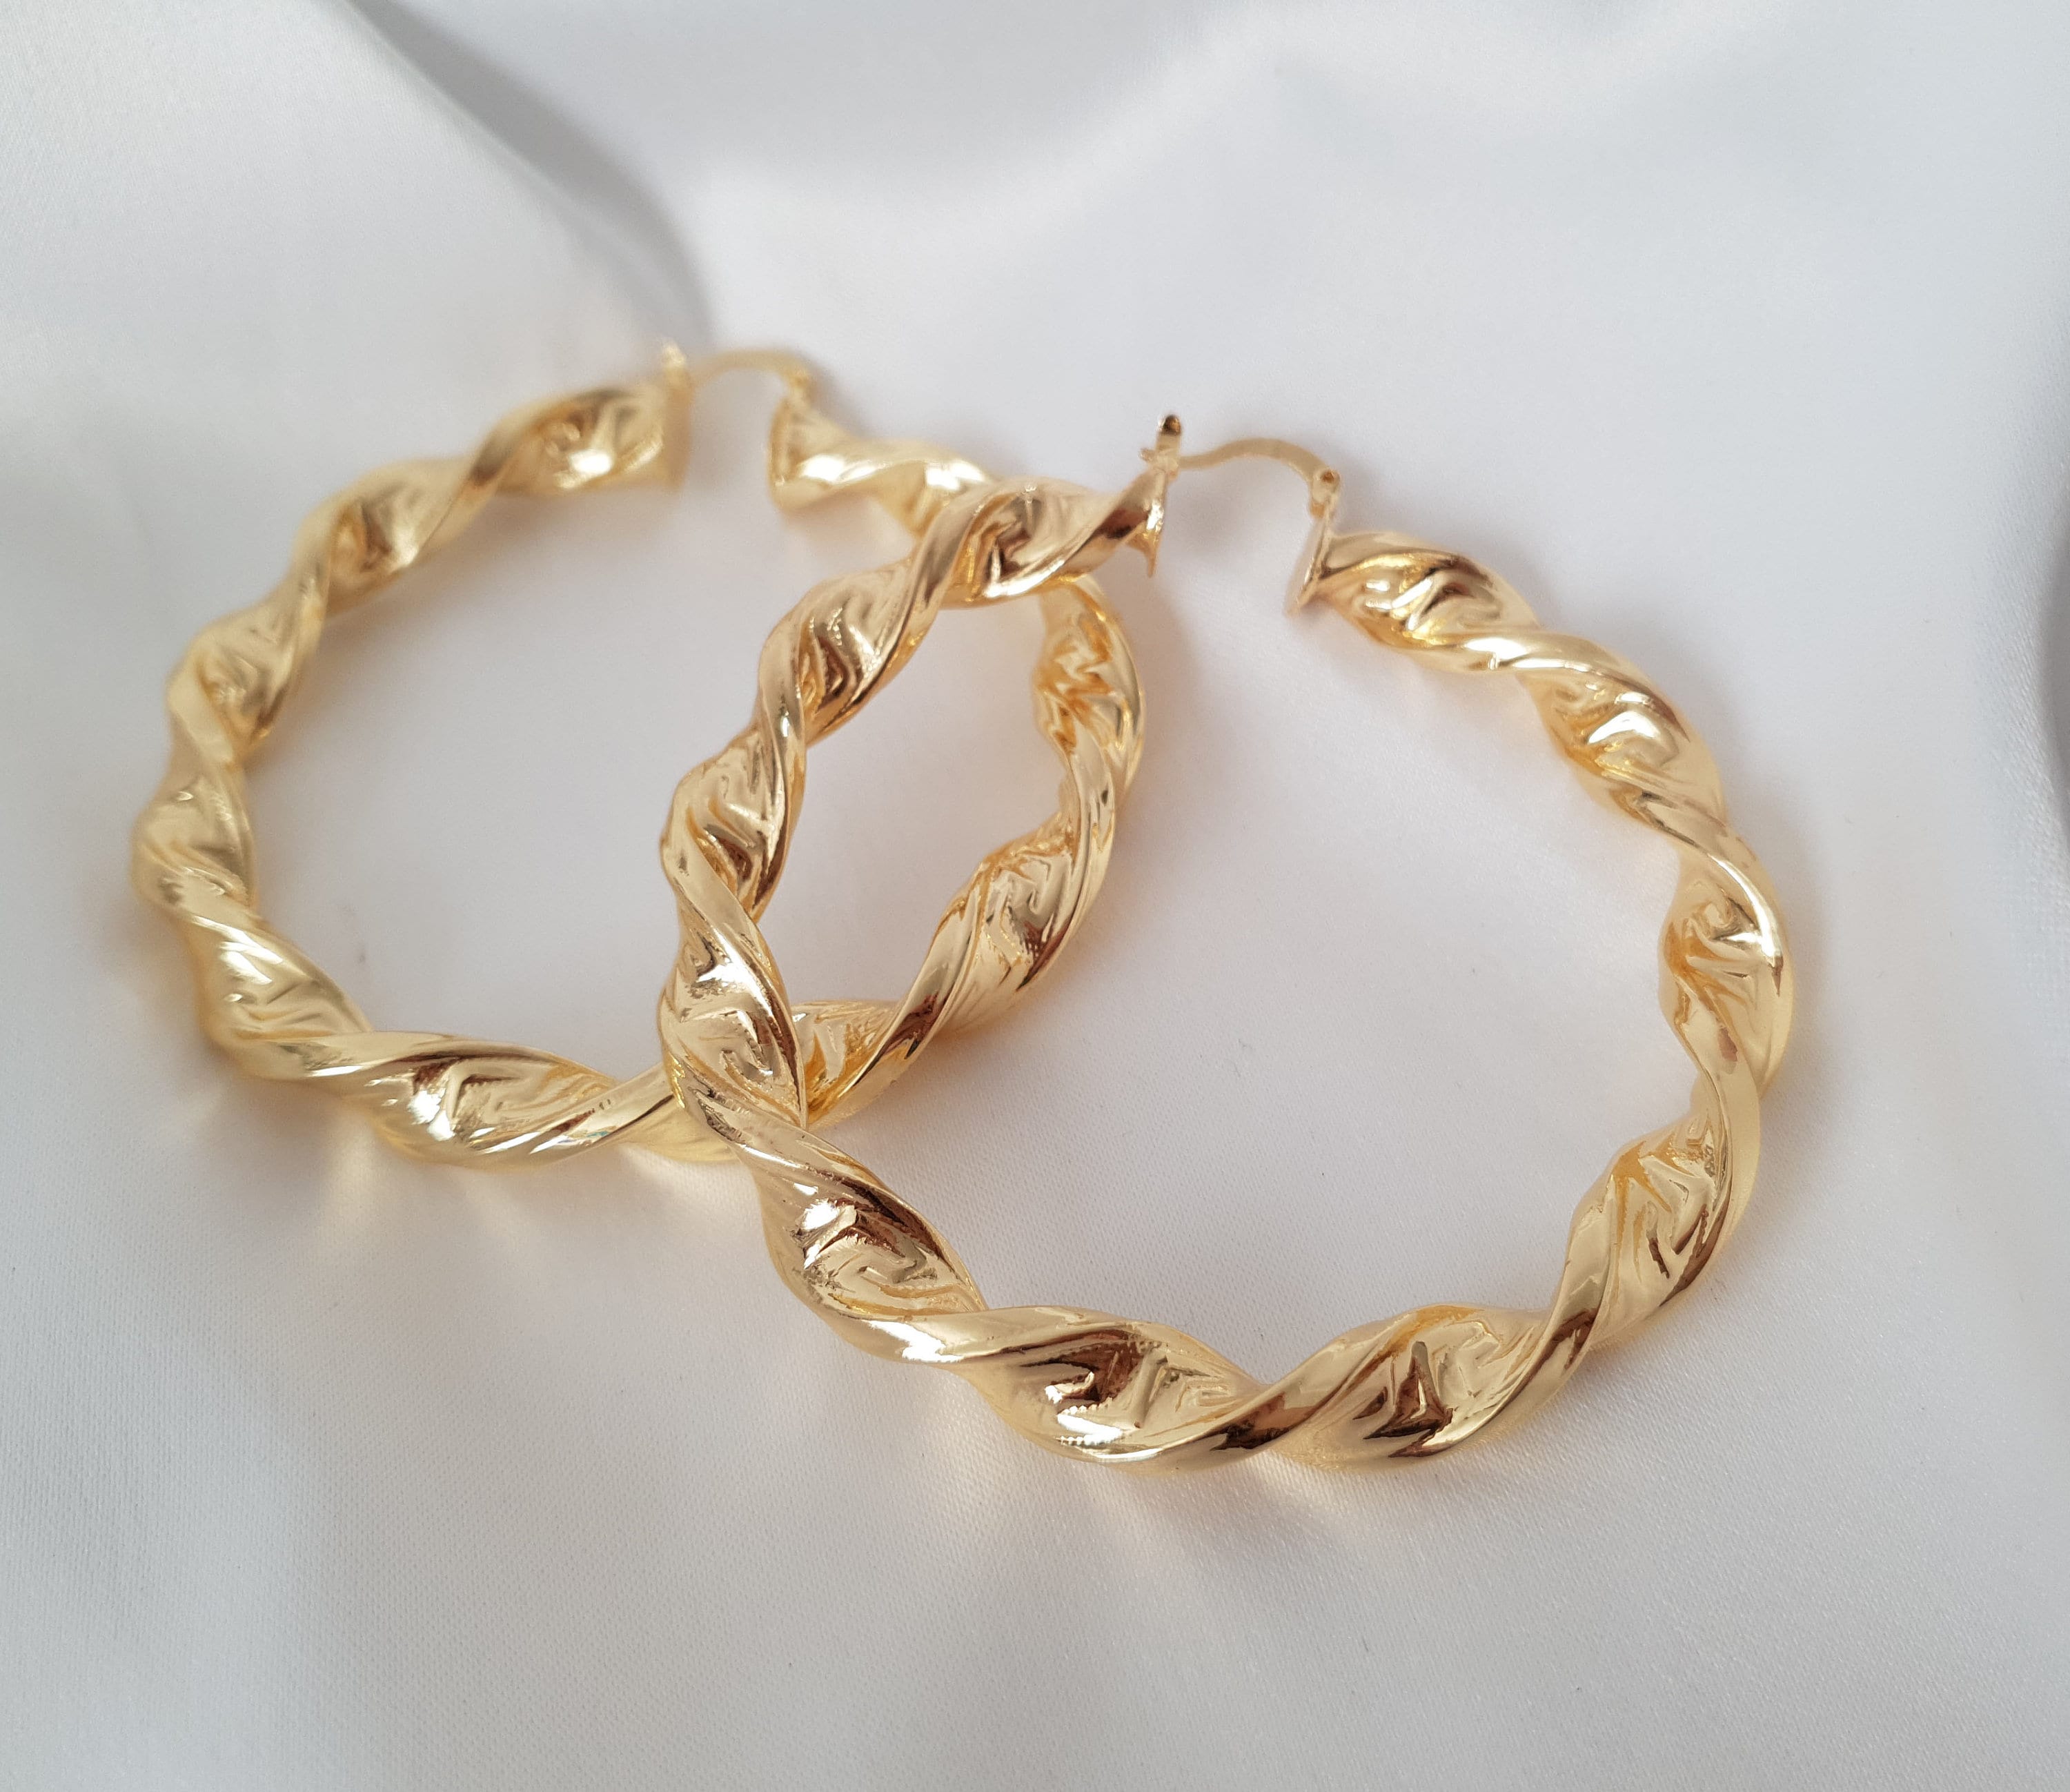 Discover more than 239 large twisted gold hoop earrings best